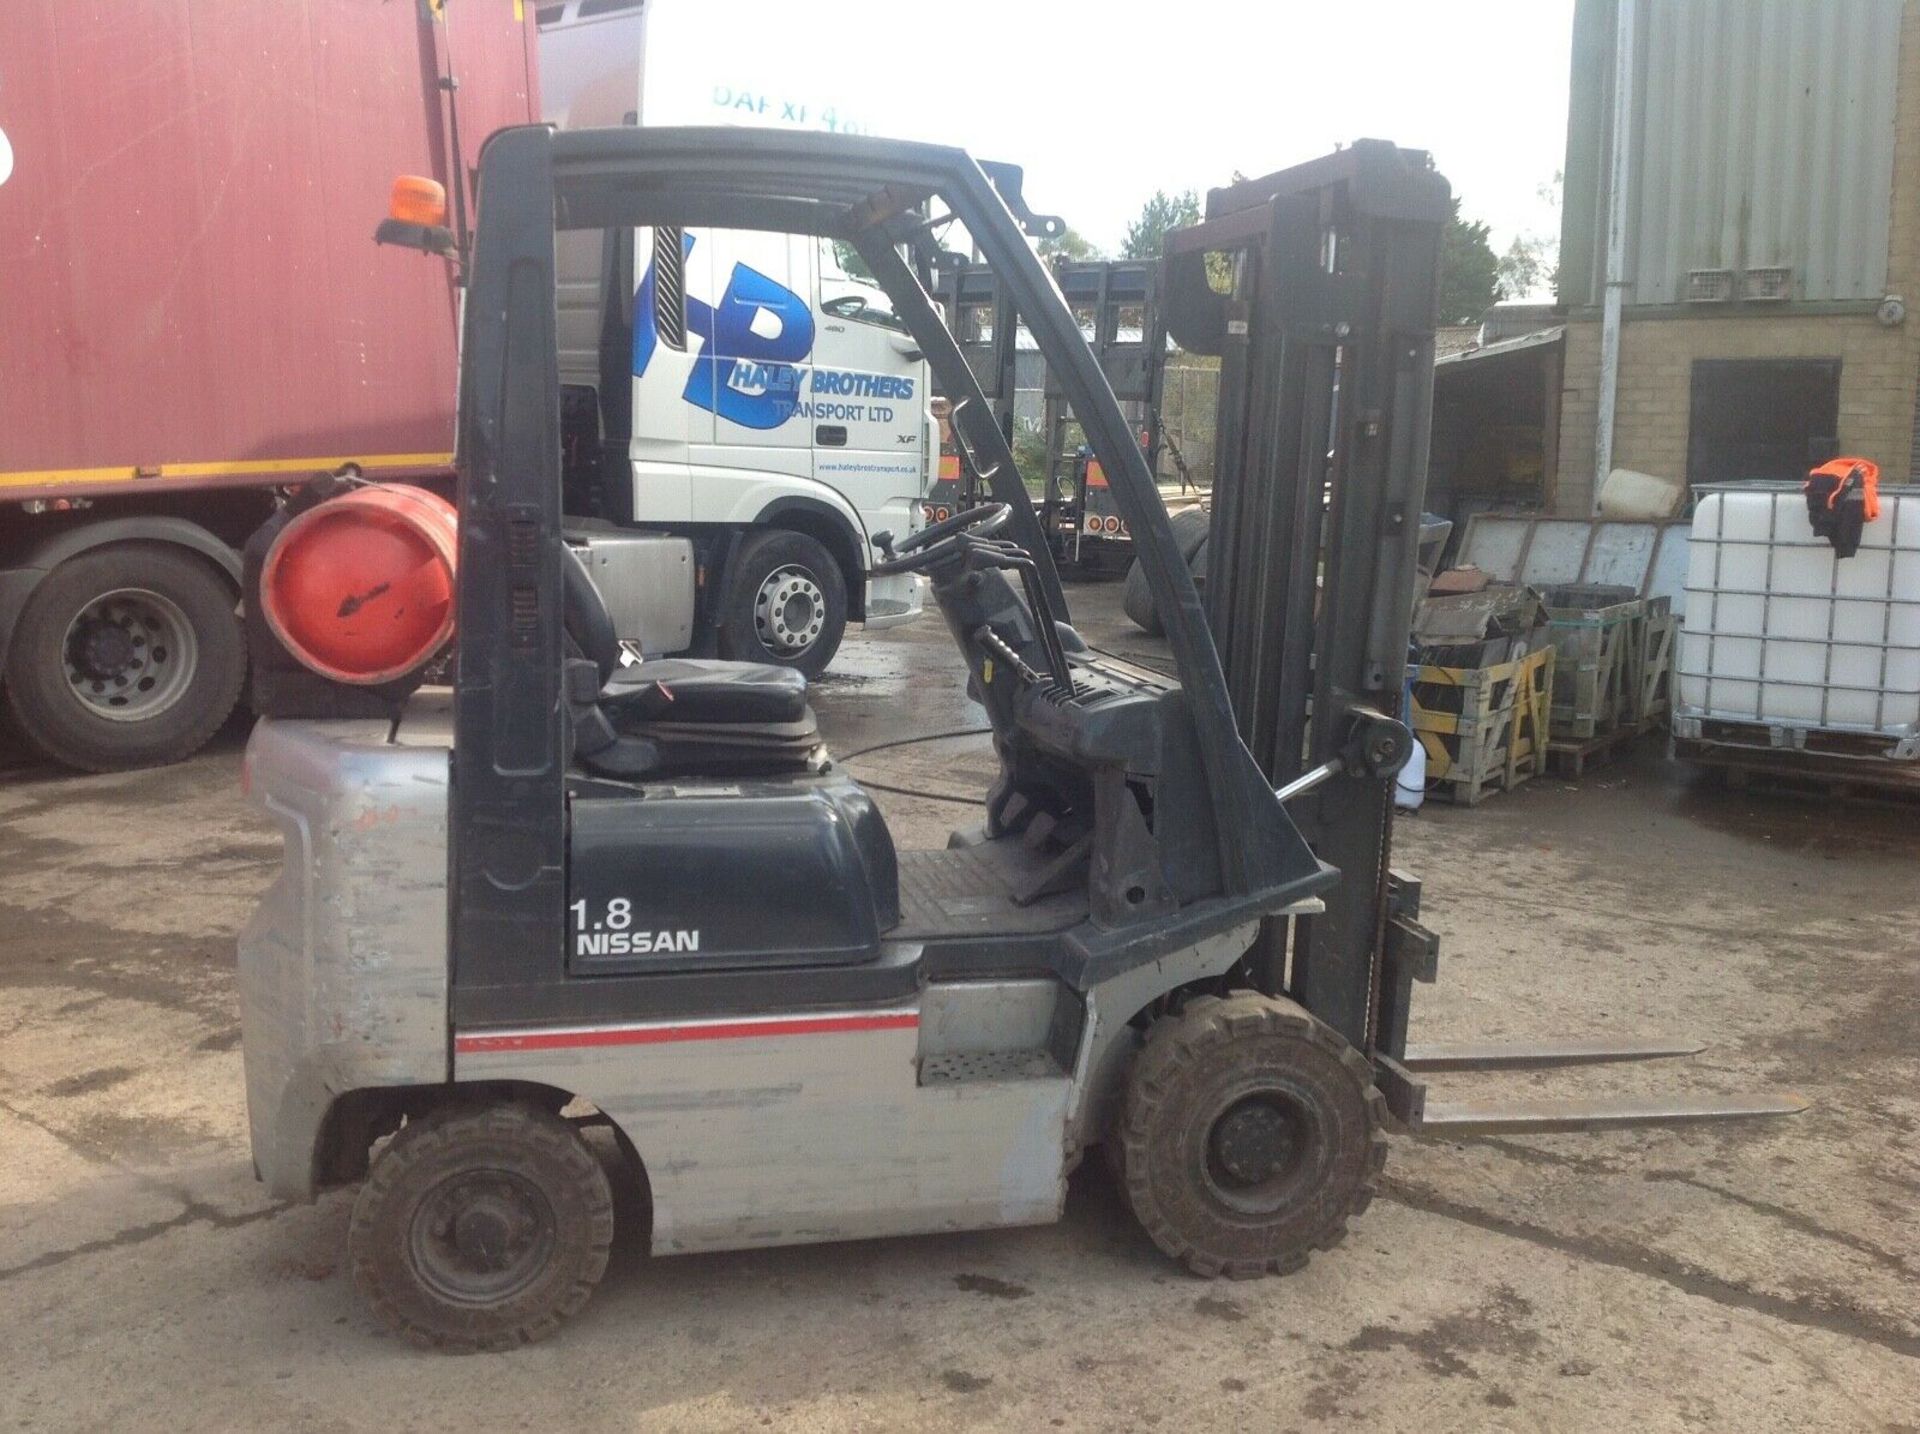 Nissan 1.8 ton gas forklift - Image 4 of 5